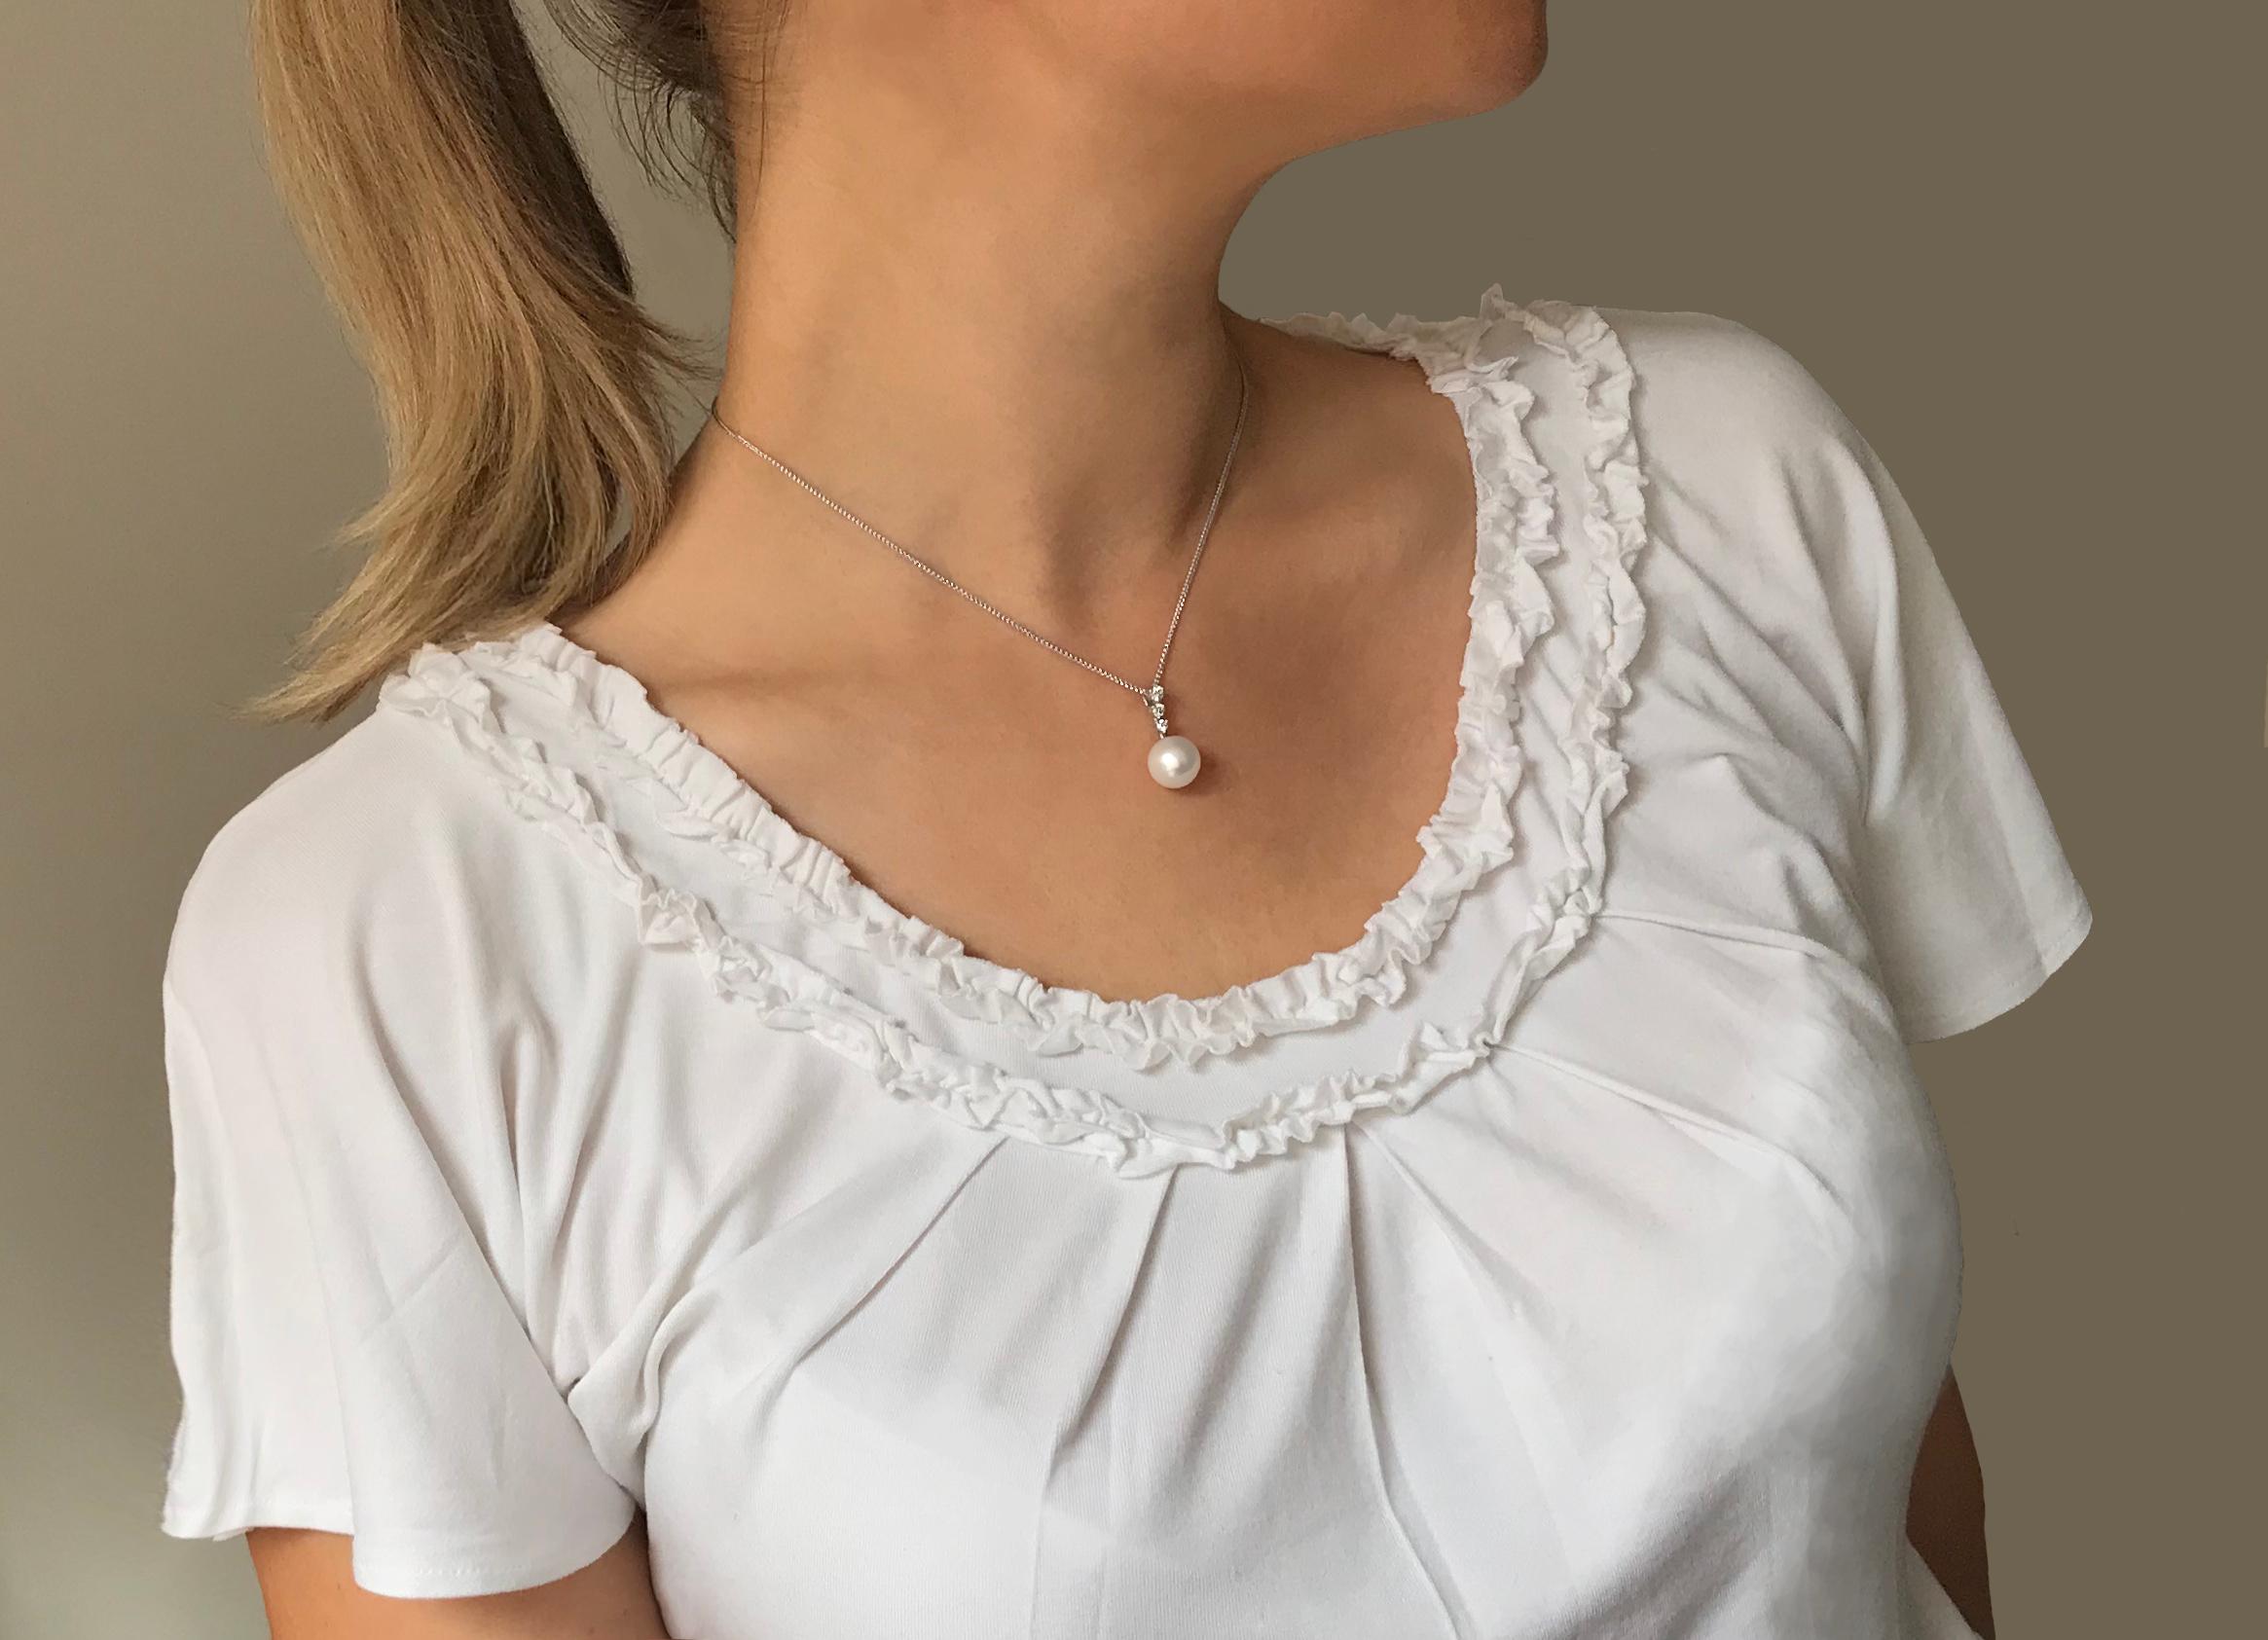 This elegant Pendant by Yoko London features a stunning South Sea Pearl, accentuated perfectly by the Triology of White Diamonds it has been suspended from. 
The understated simplicity of the Design allows the high quality of the South Sea Pearls